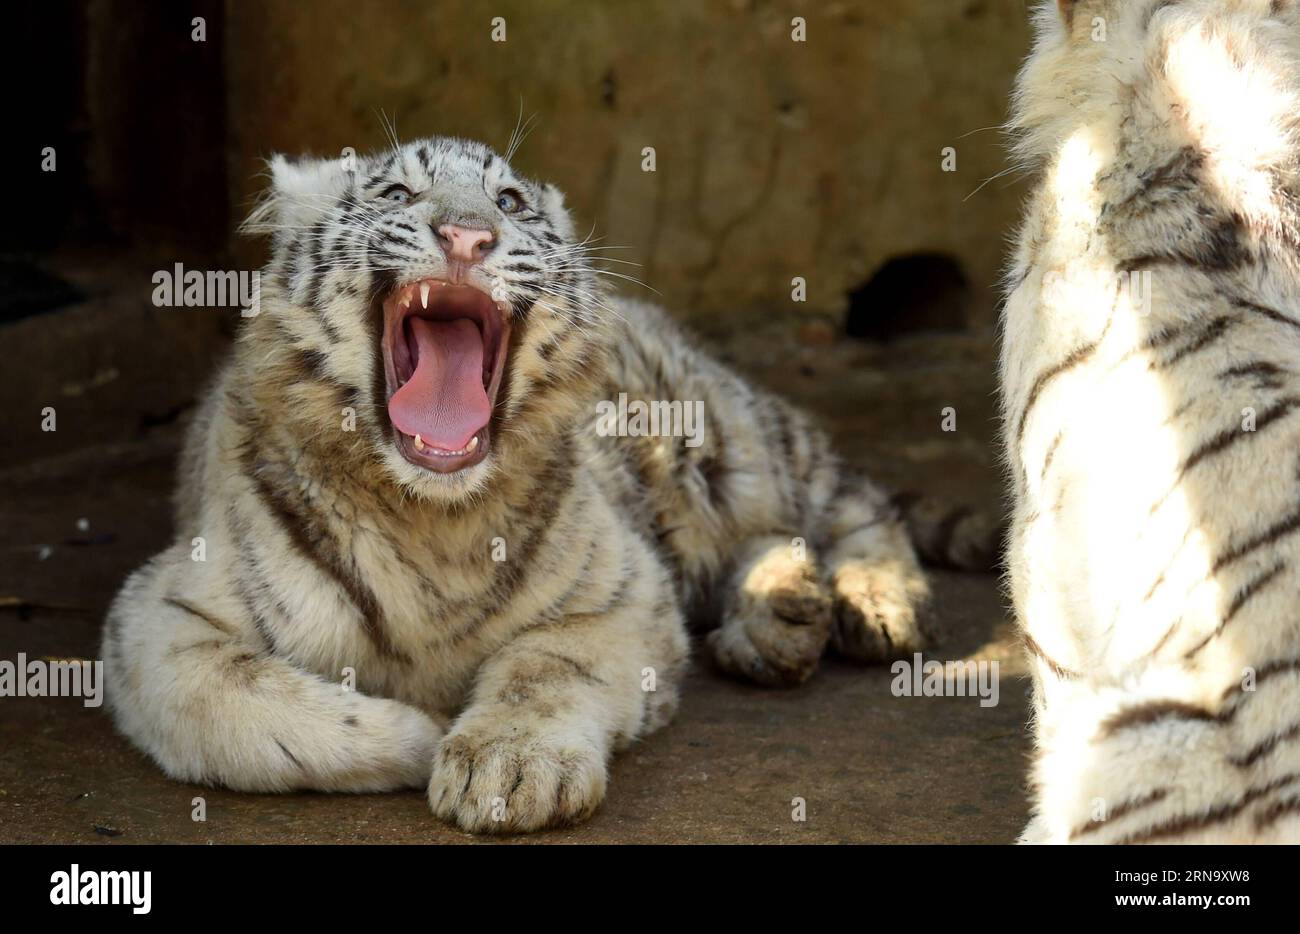 China: Nachwuchs bei weißen Tigern in Kunming (151224) -- KUNMING, Dec. 24, 2015 -- White tiger cubs are seen at the Yunnan Wild Animal Park in Kunming, capital of southwest China s Yunnan Province, Dec. 24, 2015. A rare set of white tiger quintuplets was born on Oct. 26, 2015 in the park. All five cubs survived their fragile newborn period, considered by experts as a miracle in the history of white tiger breeding. ) (wf) CHINA-YUNNAN-WHITE TIGER-QUINTUPLETS (CN) LinxYiguang PUBLICATIONxNOTxINxCHN   China Offspring at whitening Tigers in Kunming 151224 Kunming DEC 24 2015 White Tiger Cubs are Stock Photo